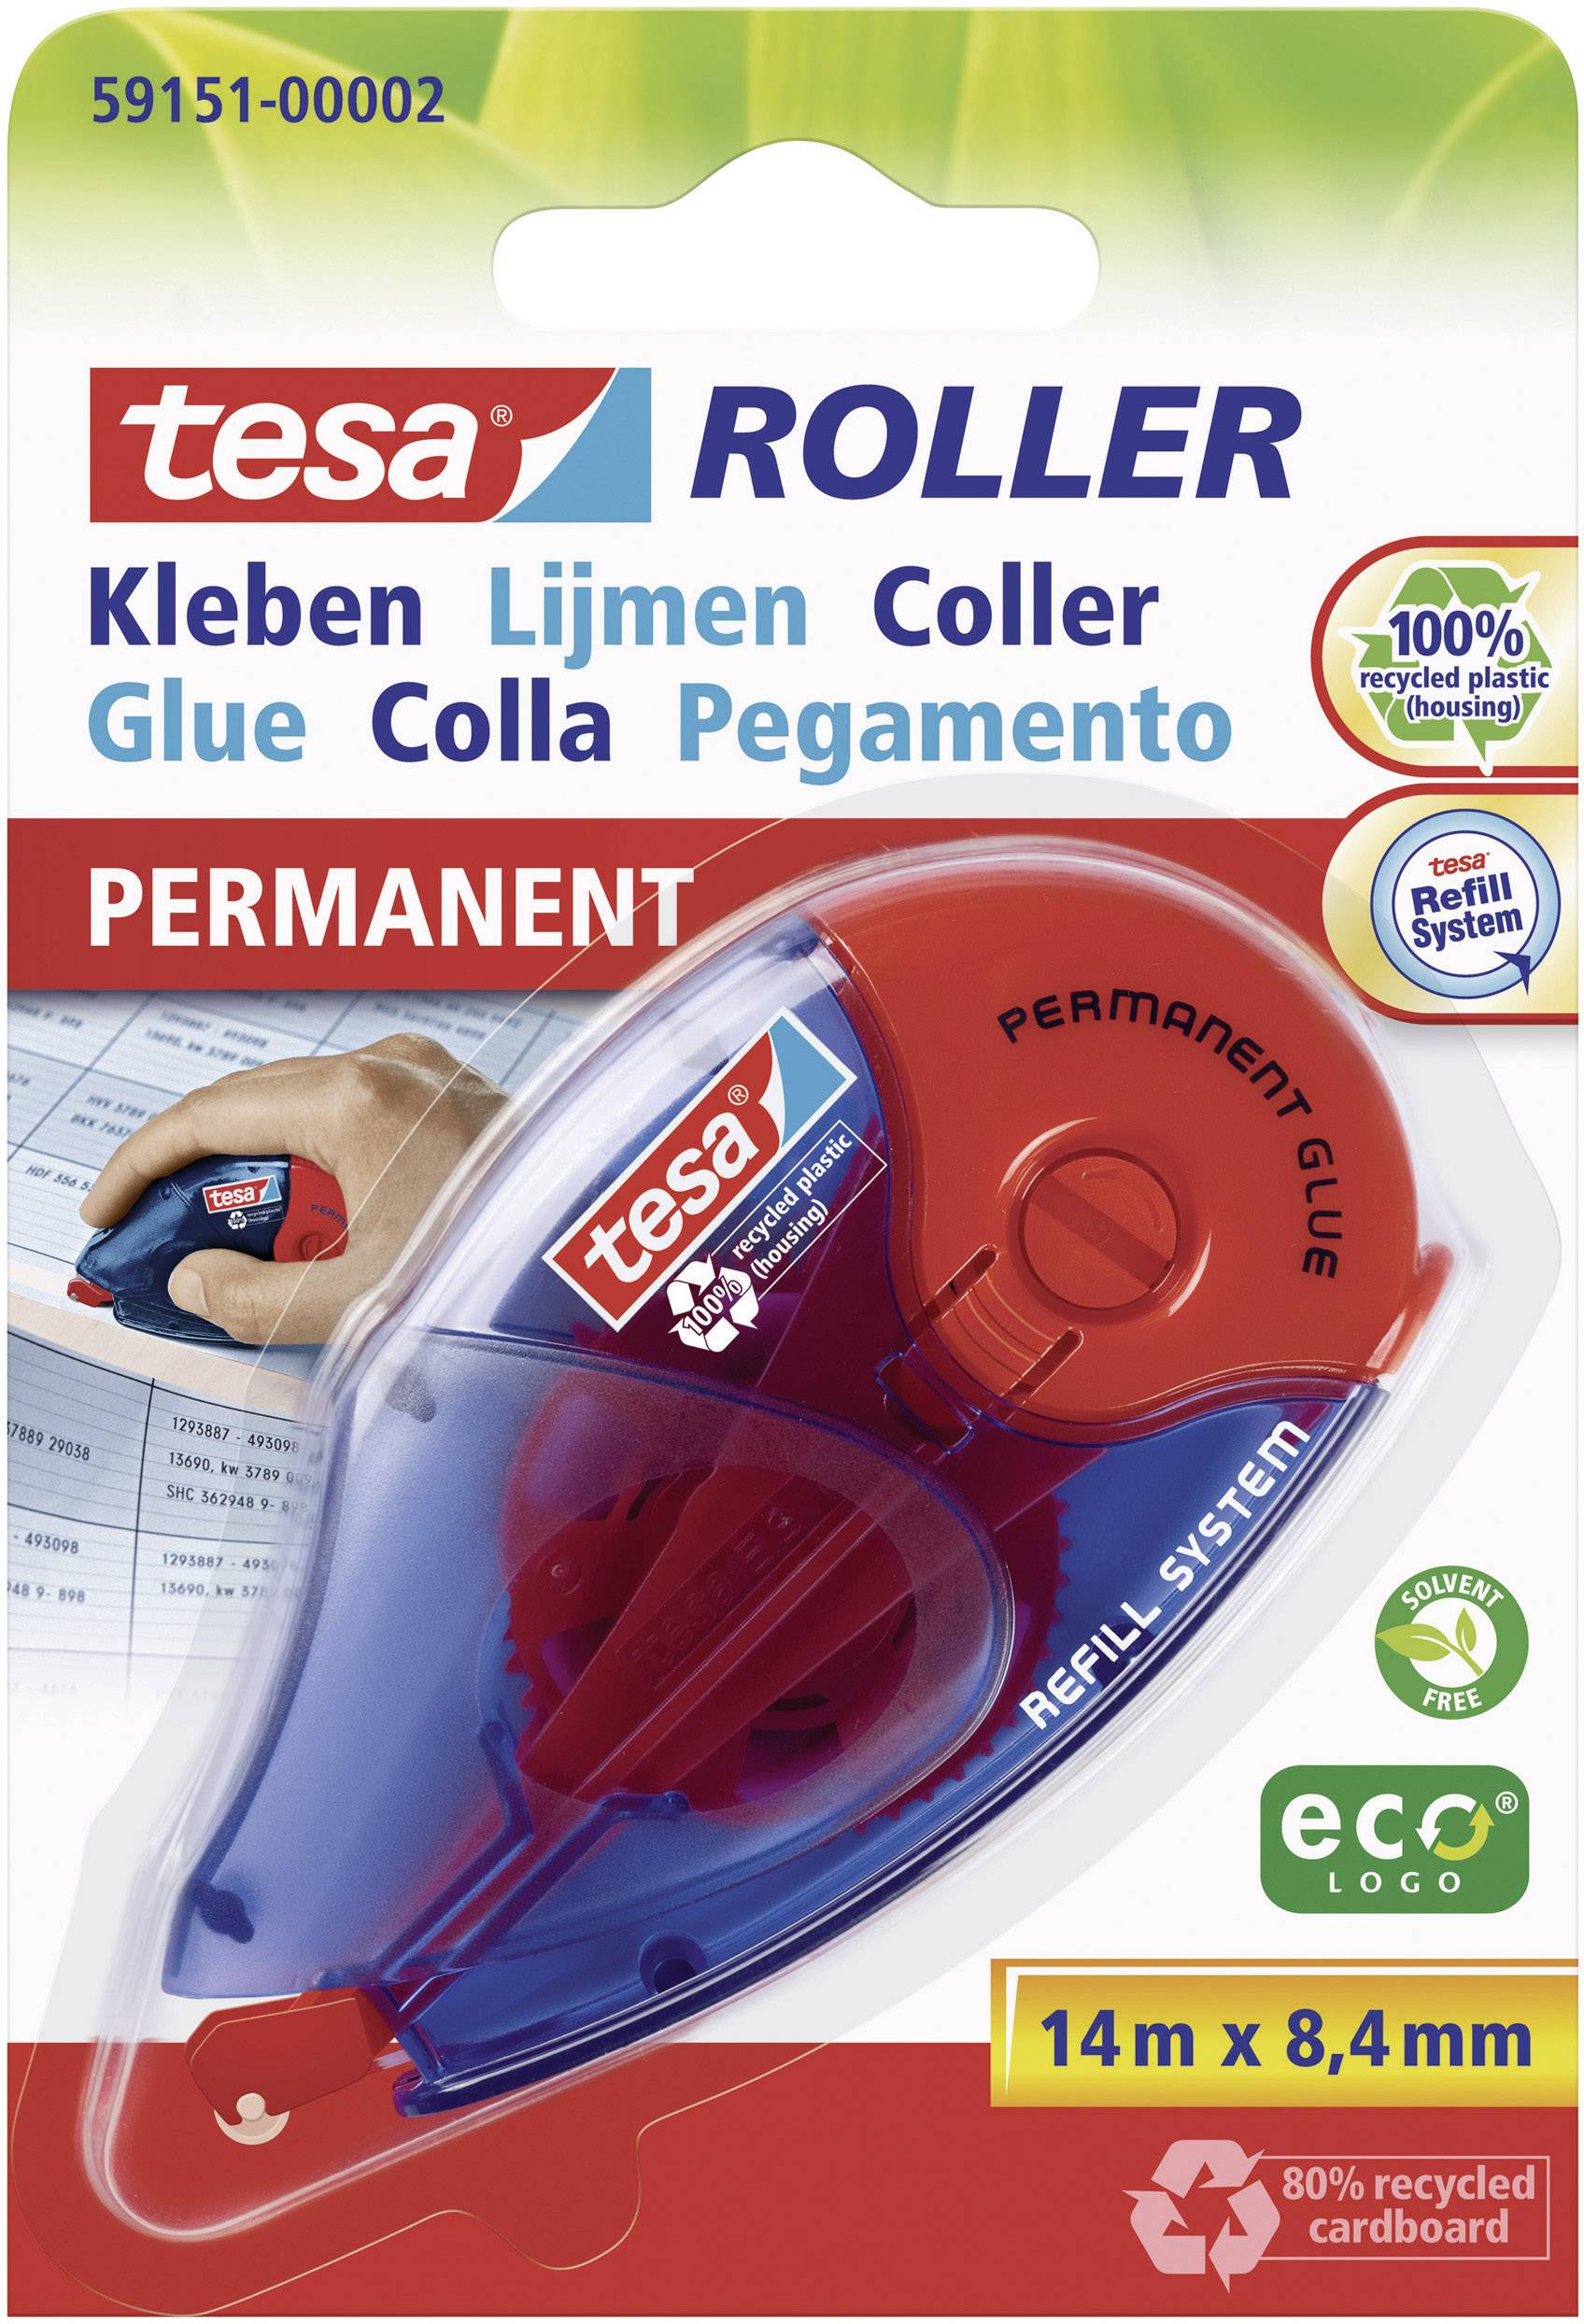 Tesa cylindre/rouleau encollage permanent ecologo recharge - blister